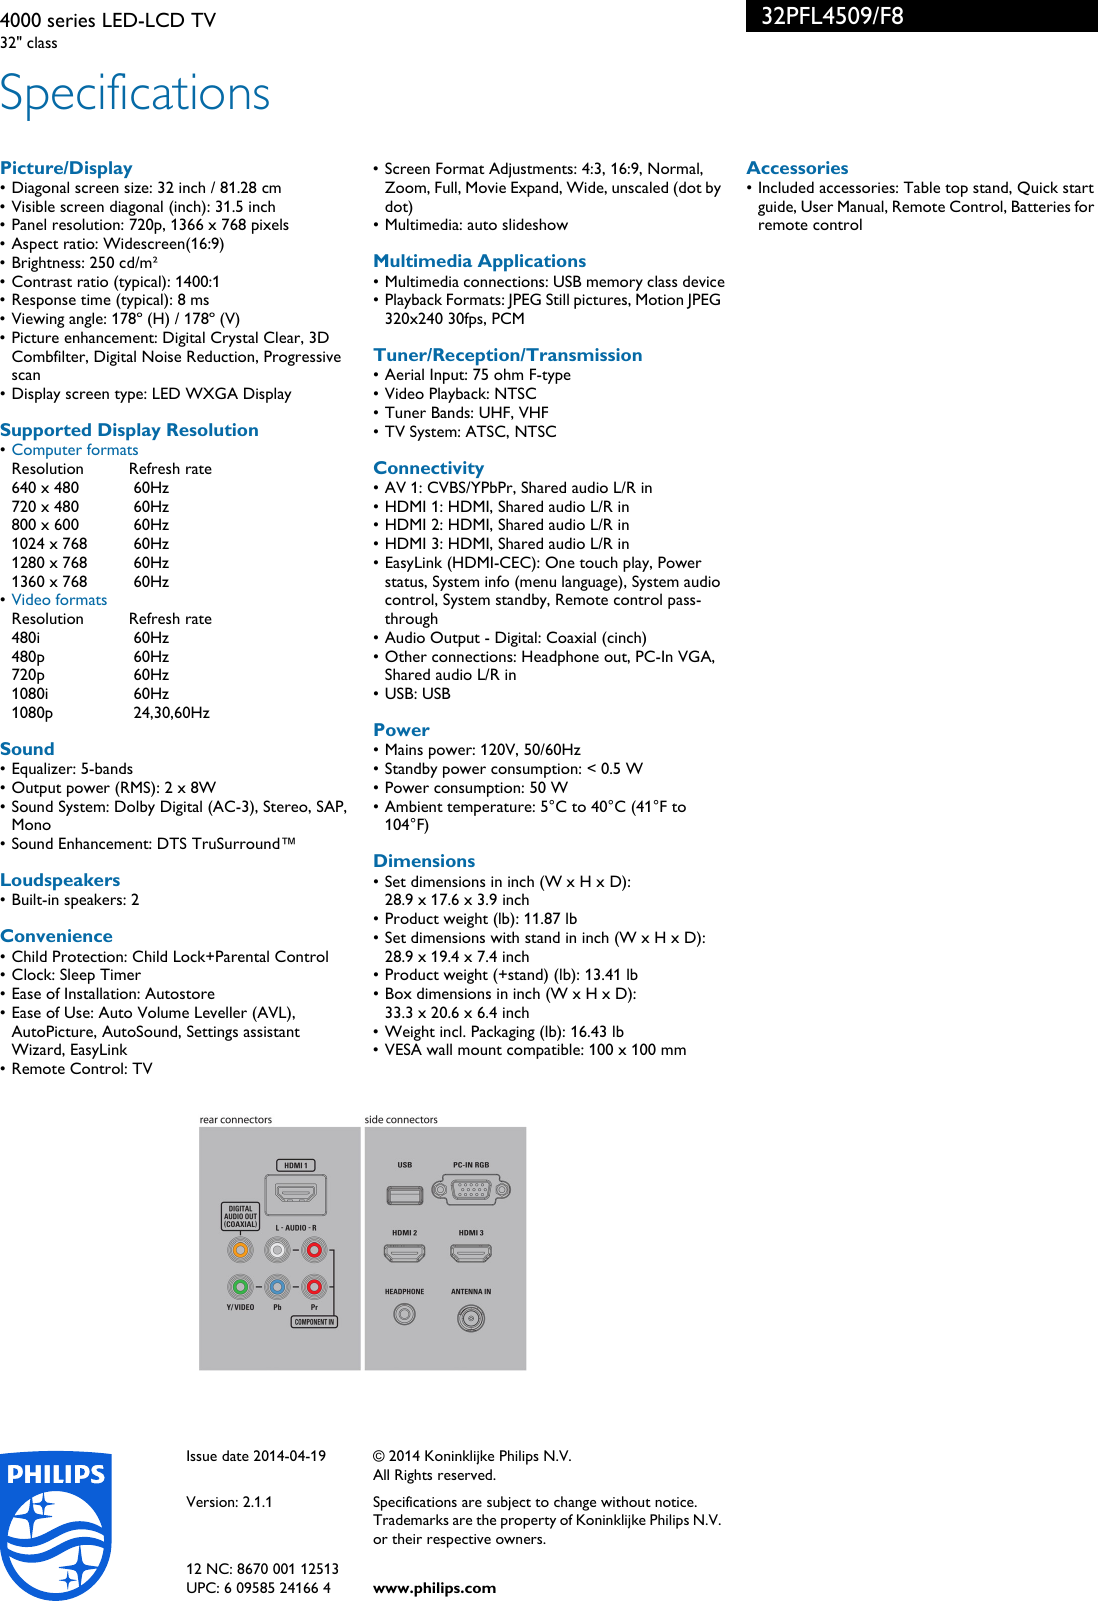 Page 3 of 3 - Philips 32PFL4509/F8 4000 Series LED-LCD TV User Manual Folleto 32pfl4509 F8 Pss